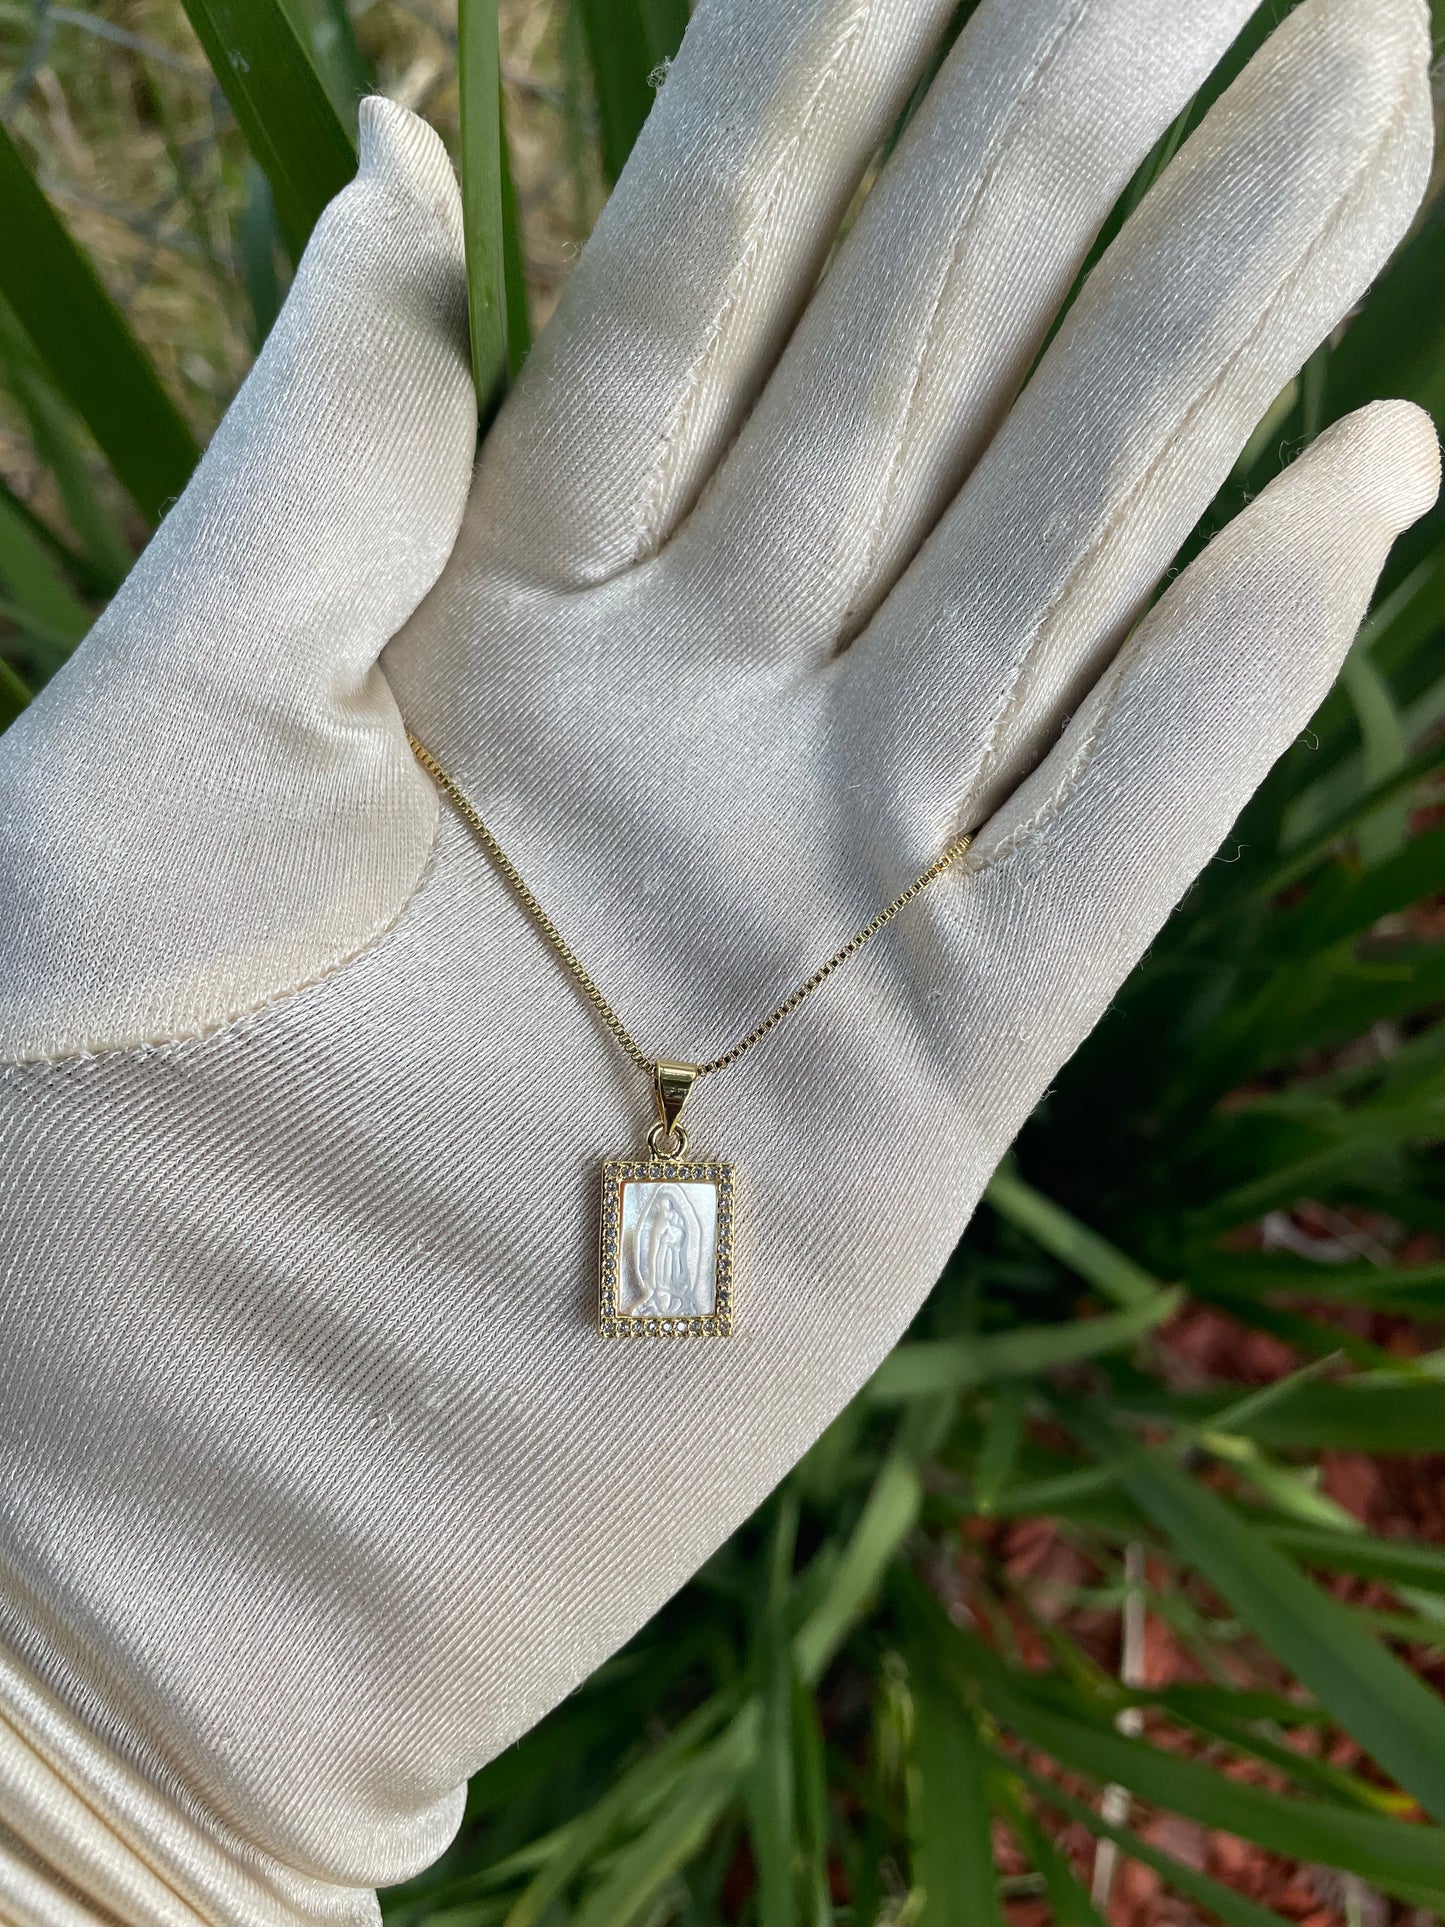 3D Reflected Hail Mary Necklace